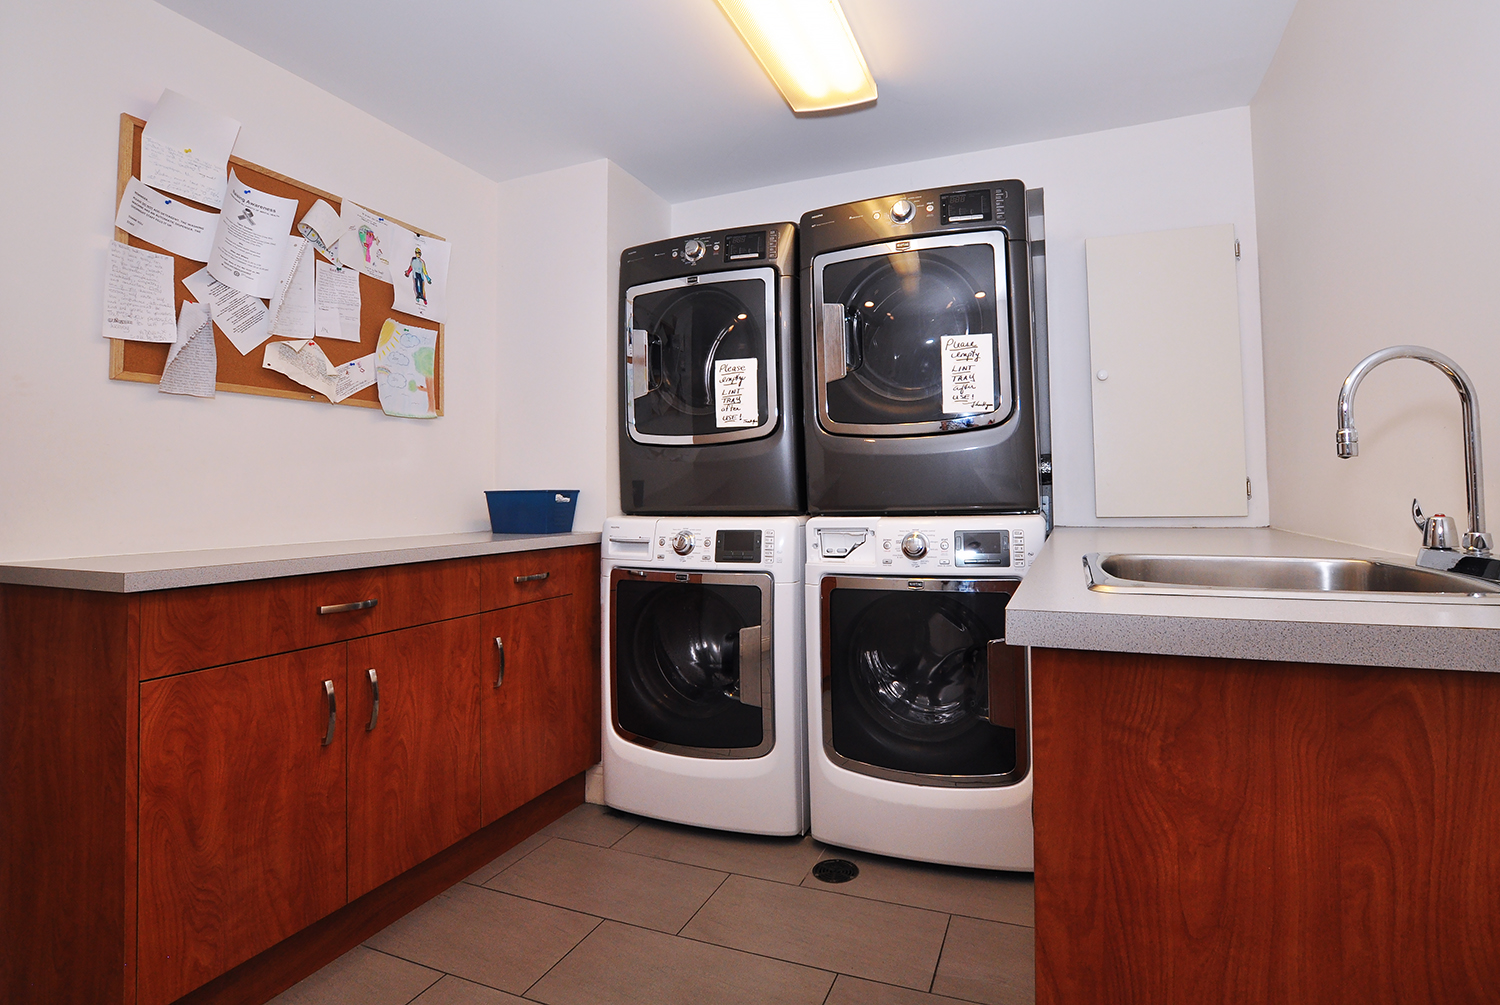 Laundry room at Munro Centre.